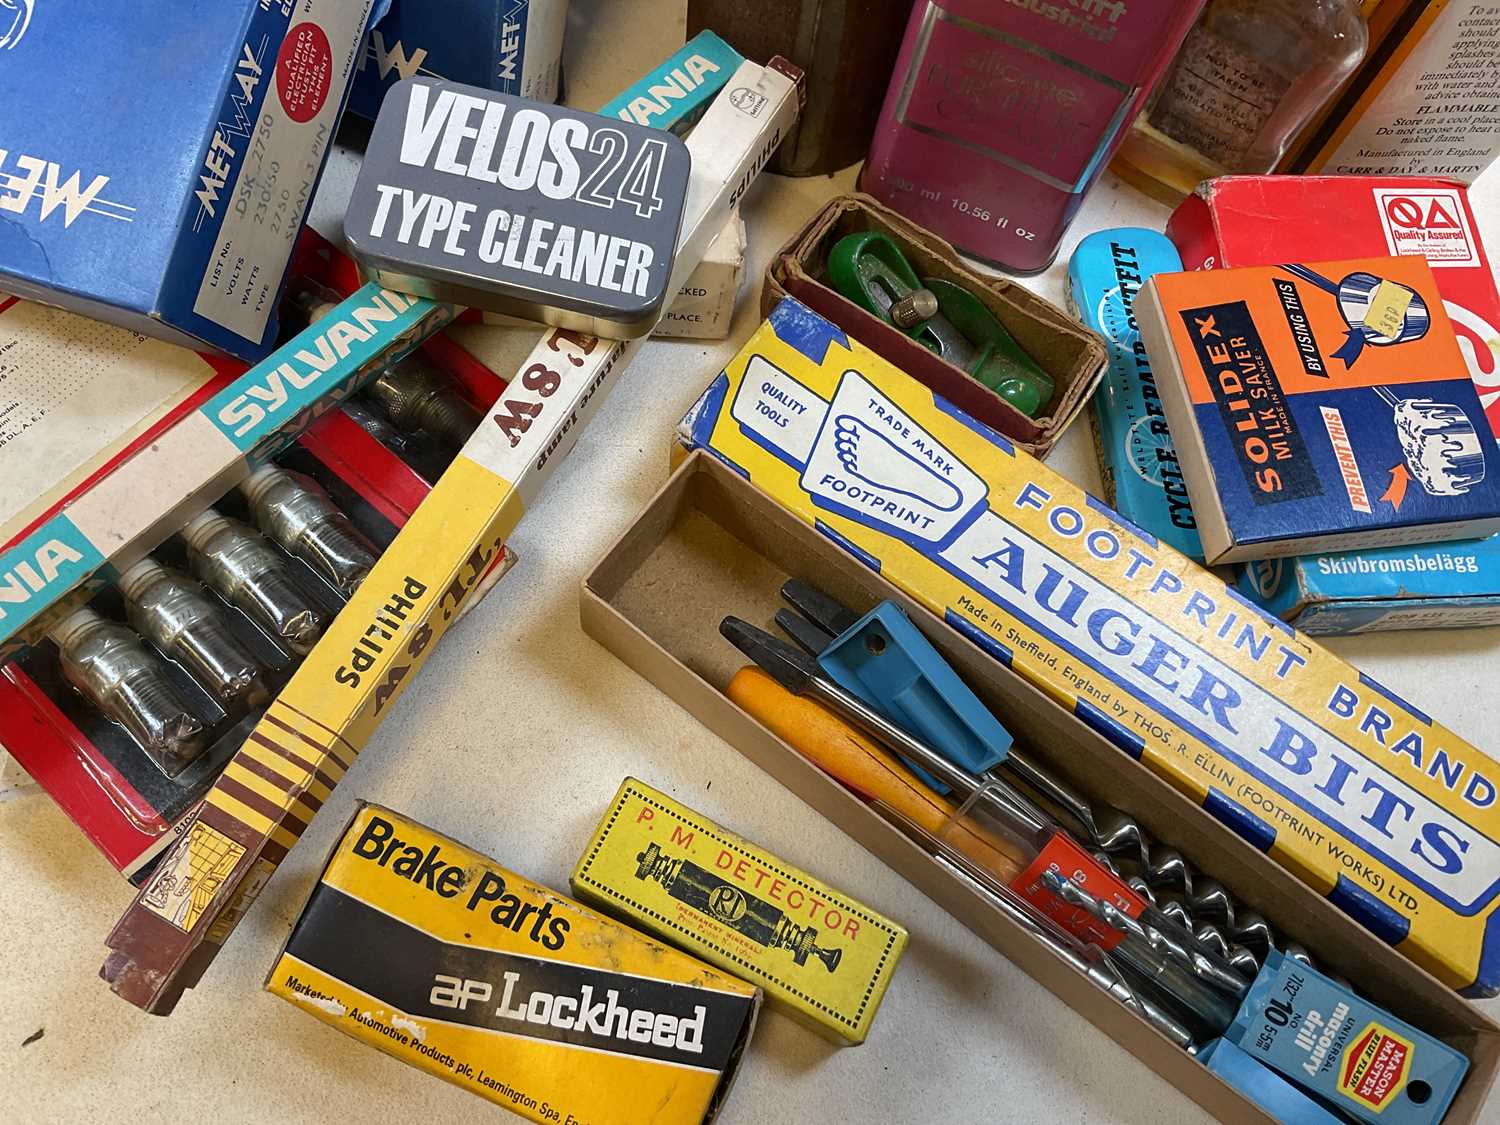 A collection of vintage tins and workshop finds including torches, car components, light bulbs, - Image 4 of 6